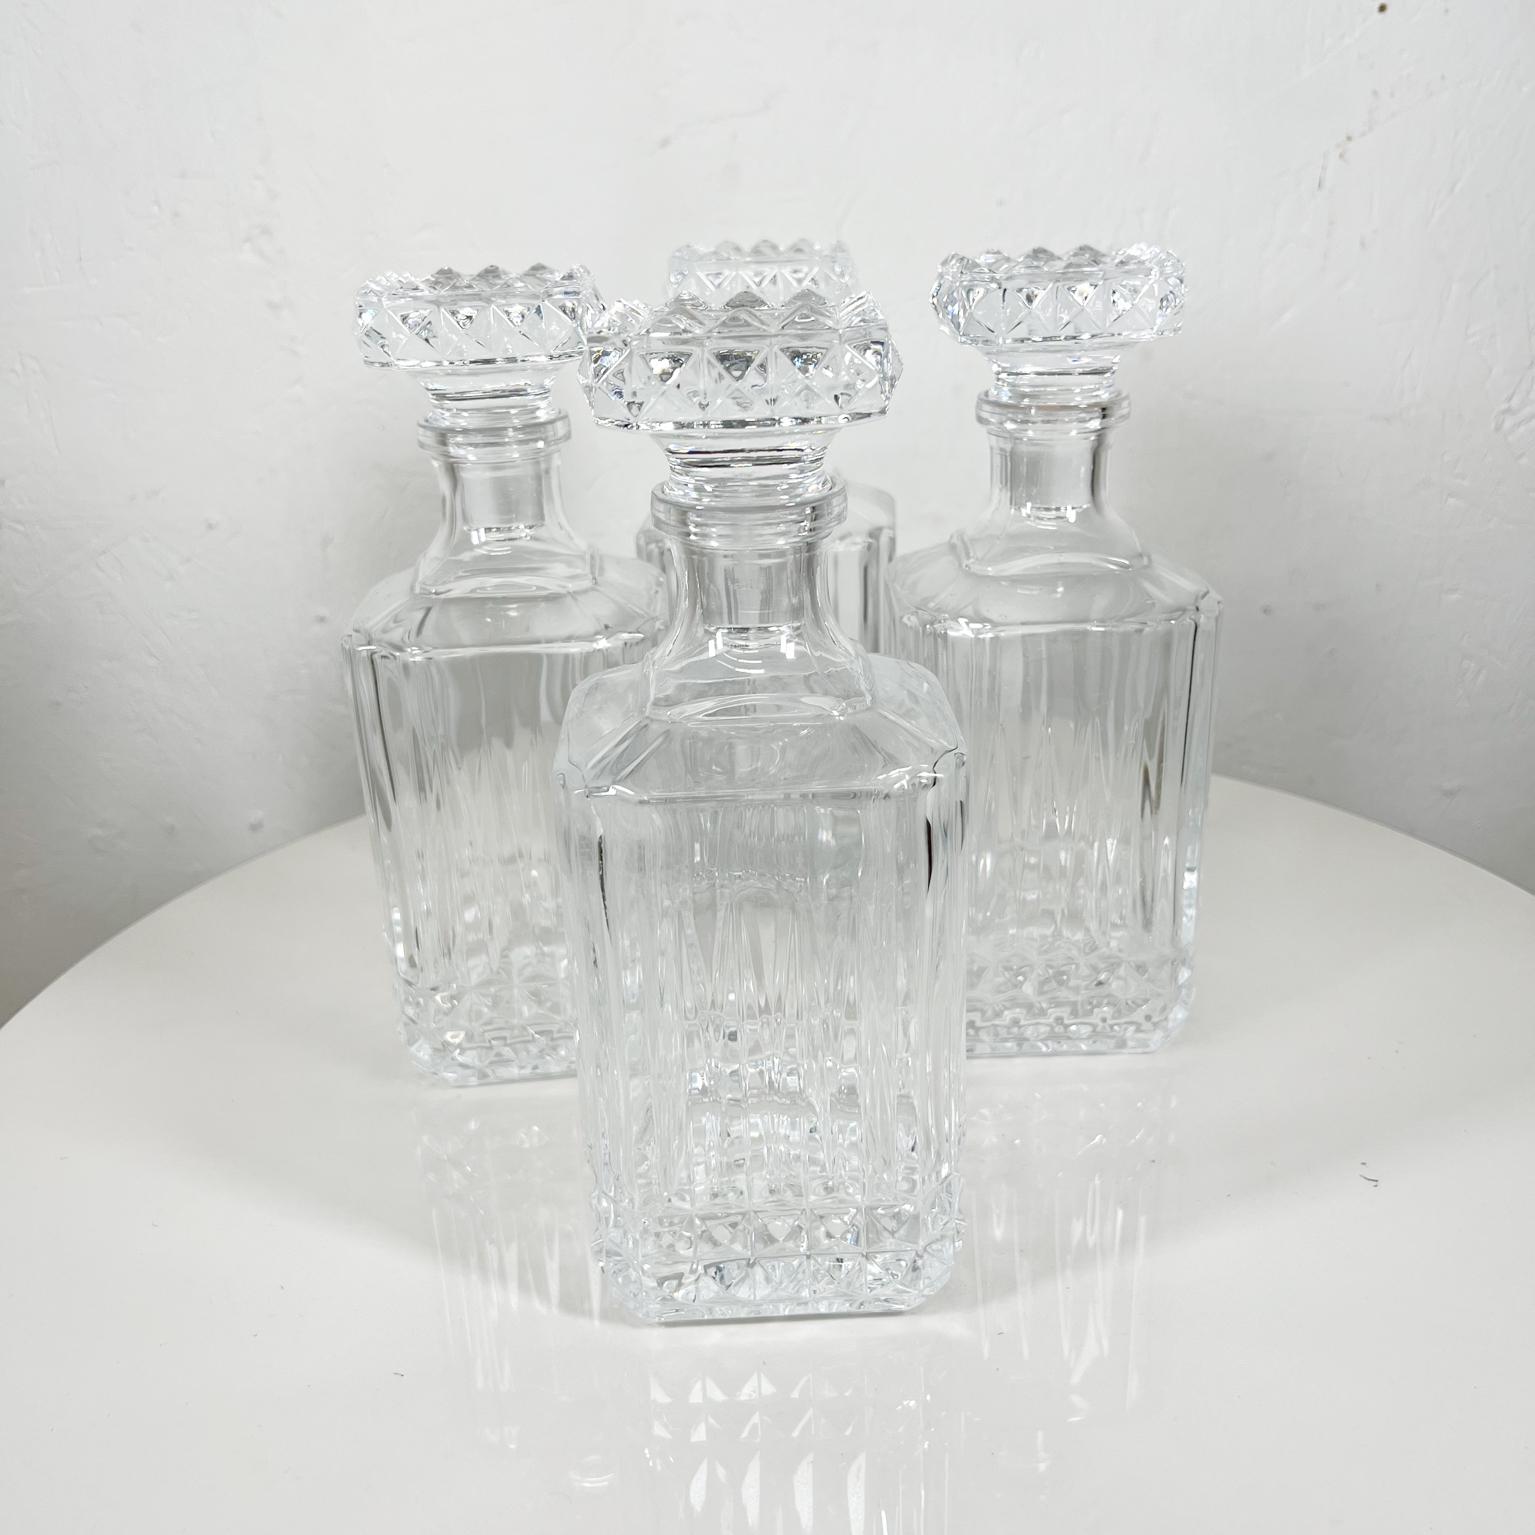 Modernist square cut glass decanters liquor bar whiskey bottle set of four
10 tall x 3.5 x 3.6
Four Bottles with matching bottle caps.
Beautiful design in square shape.
No information on maker
Original vintage condition.
See images